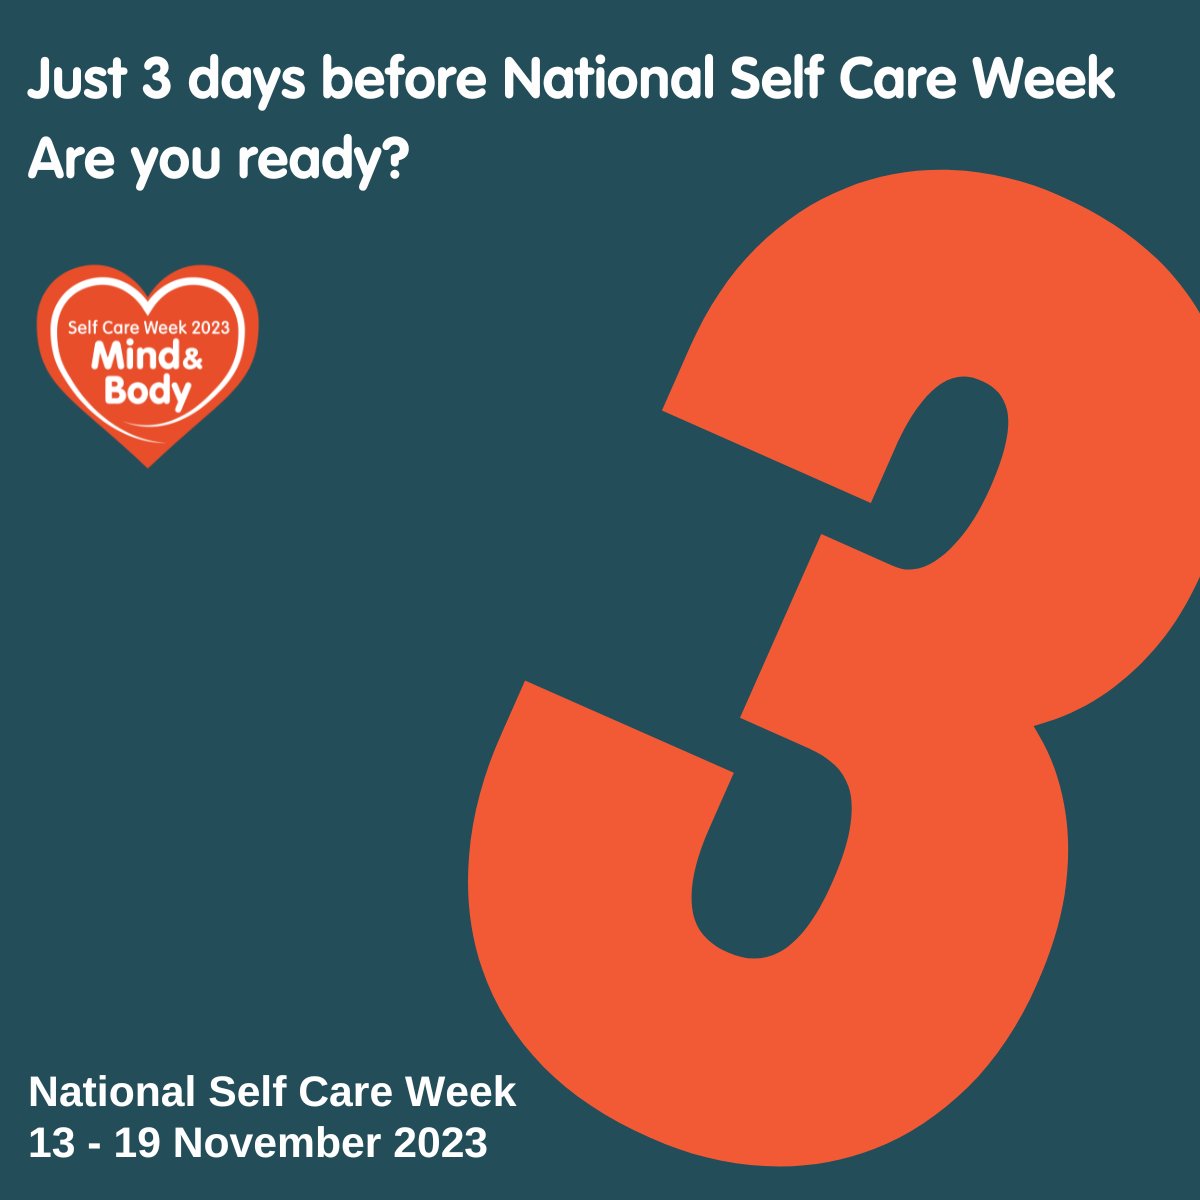 Just 3 days to go before National #SelfCareWeek there's still time to plan your activities. Take a look at our website for resources and our icon.  bit.ly/2UM6V0m @NHSYouthForum @StNurseProject @NHSMillion @Pers_Care @REENABARAI @rita1b @DrRadhaModgil @Michaelwsh